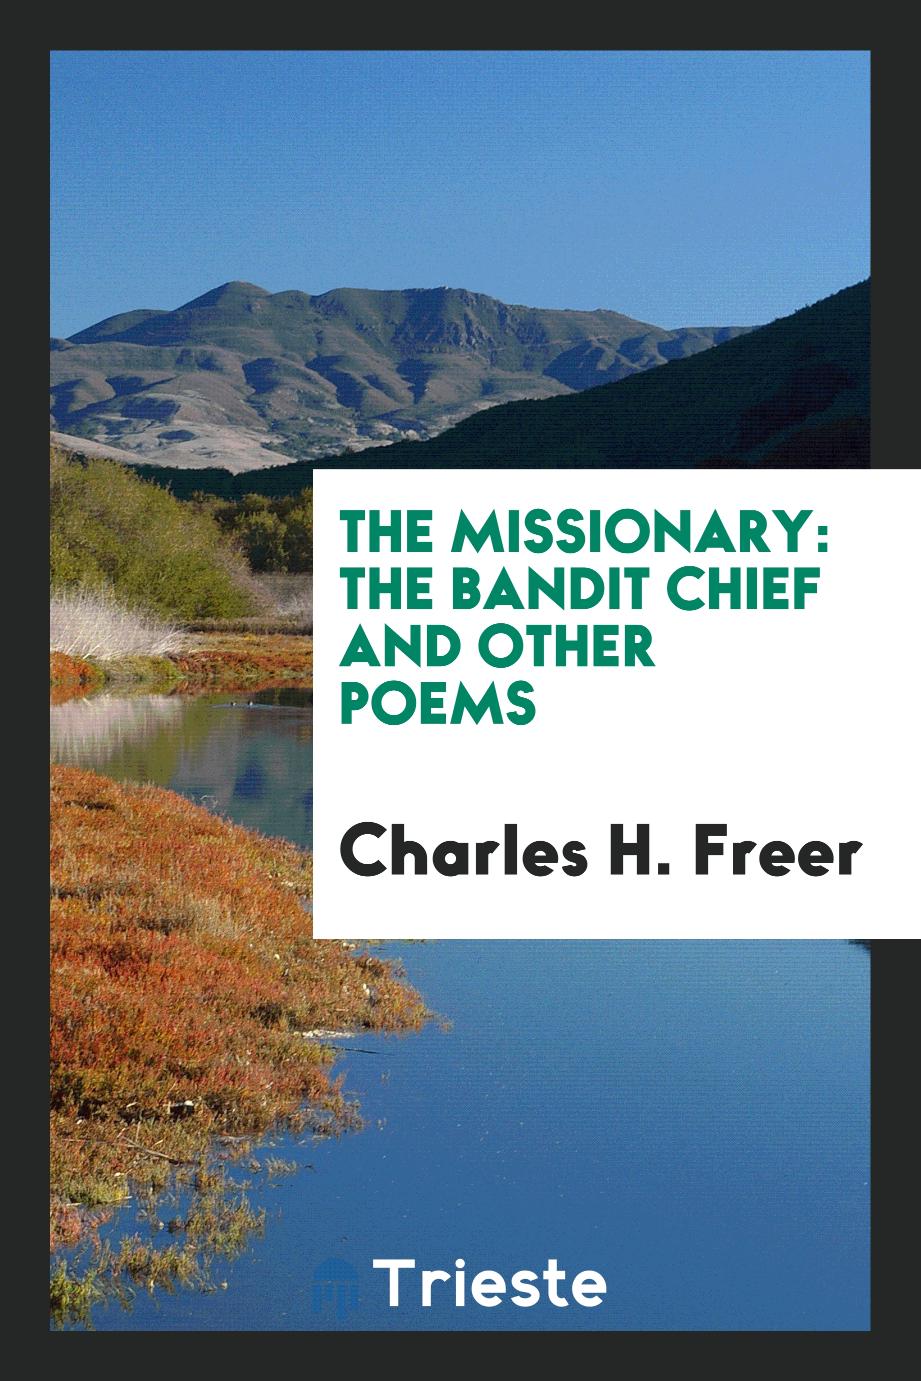 The missionary: The bandit chief and other poems